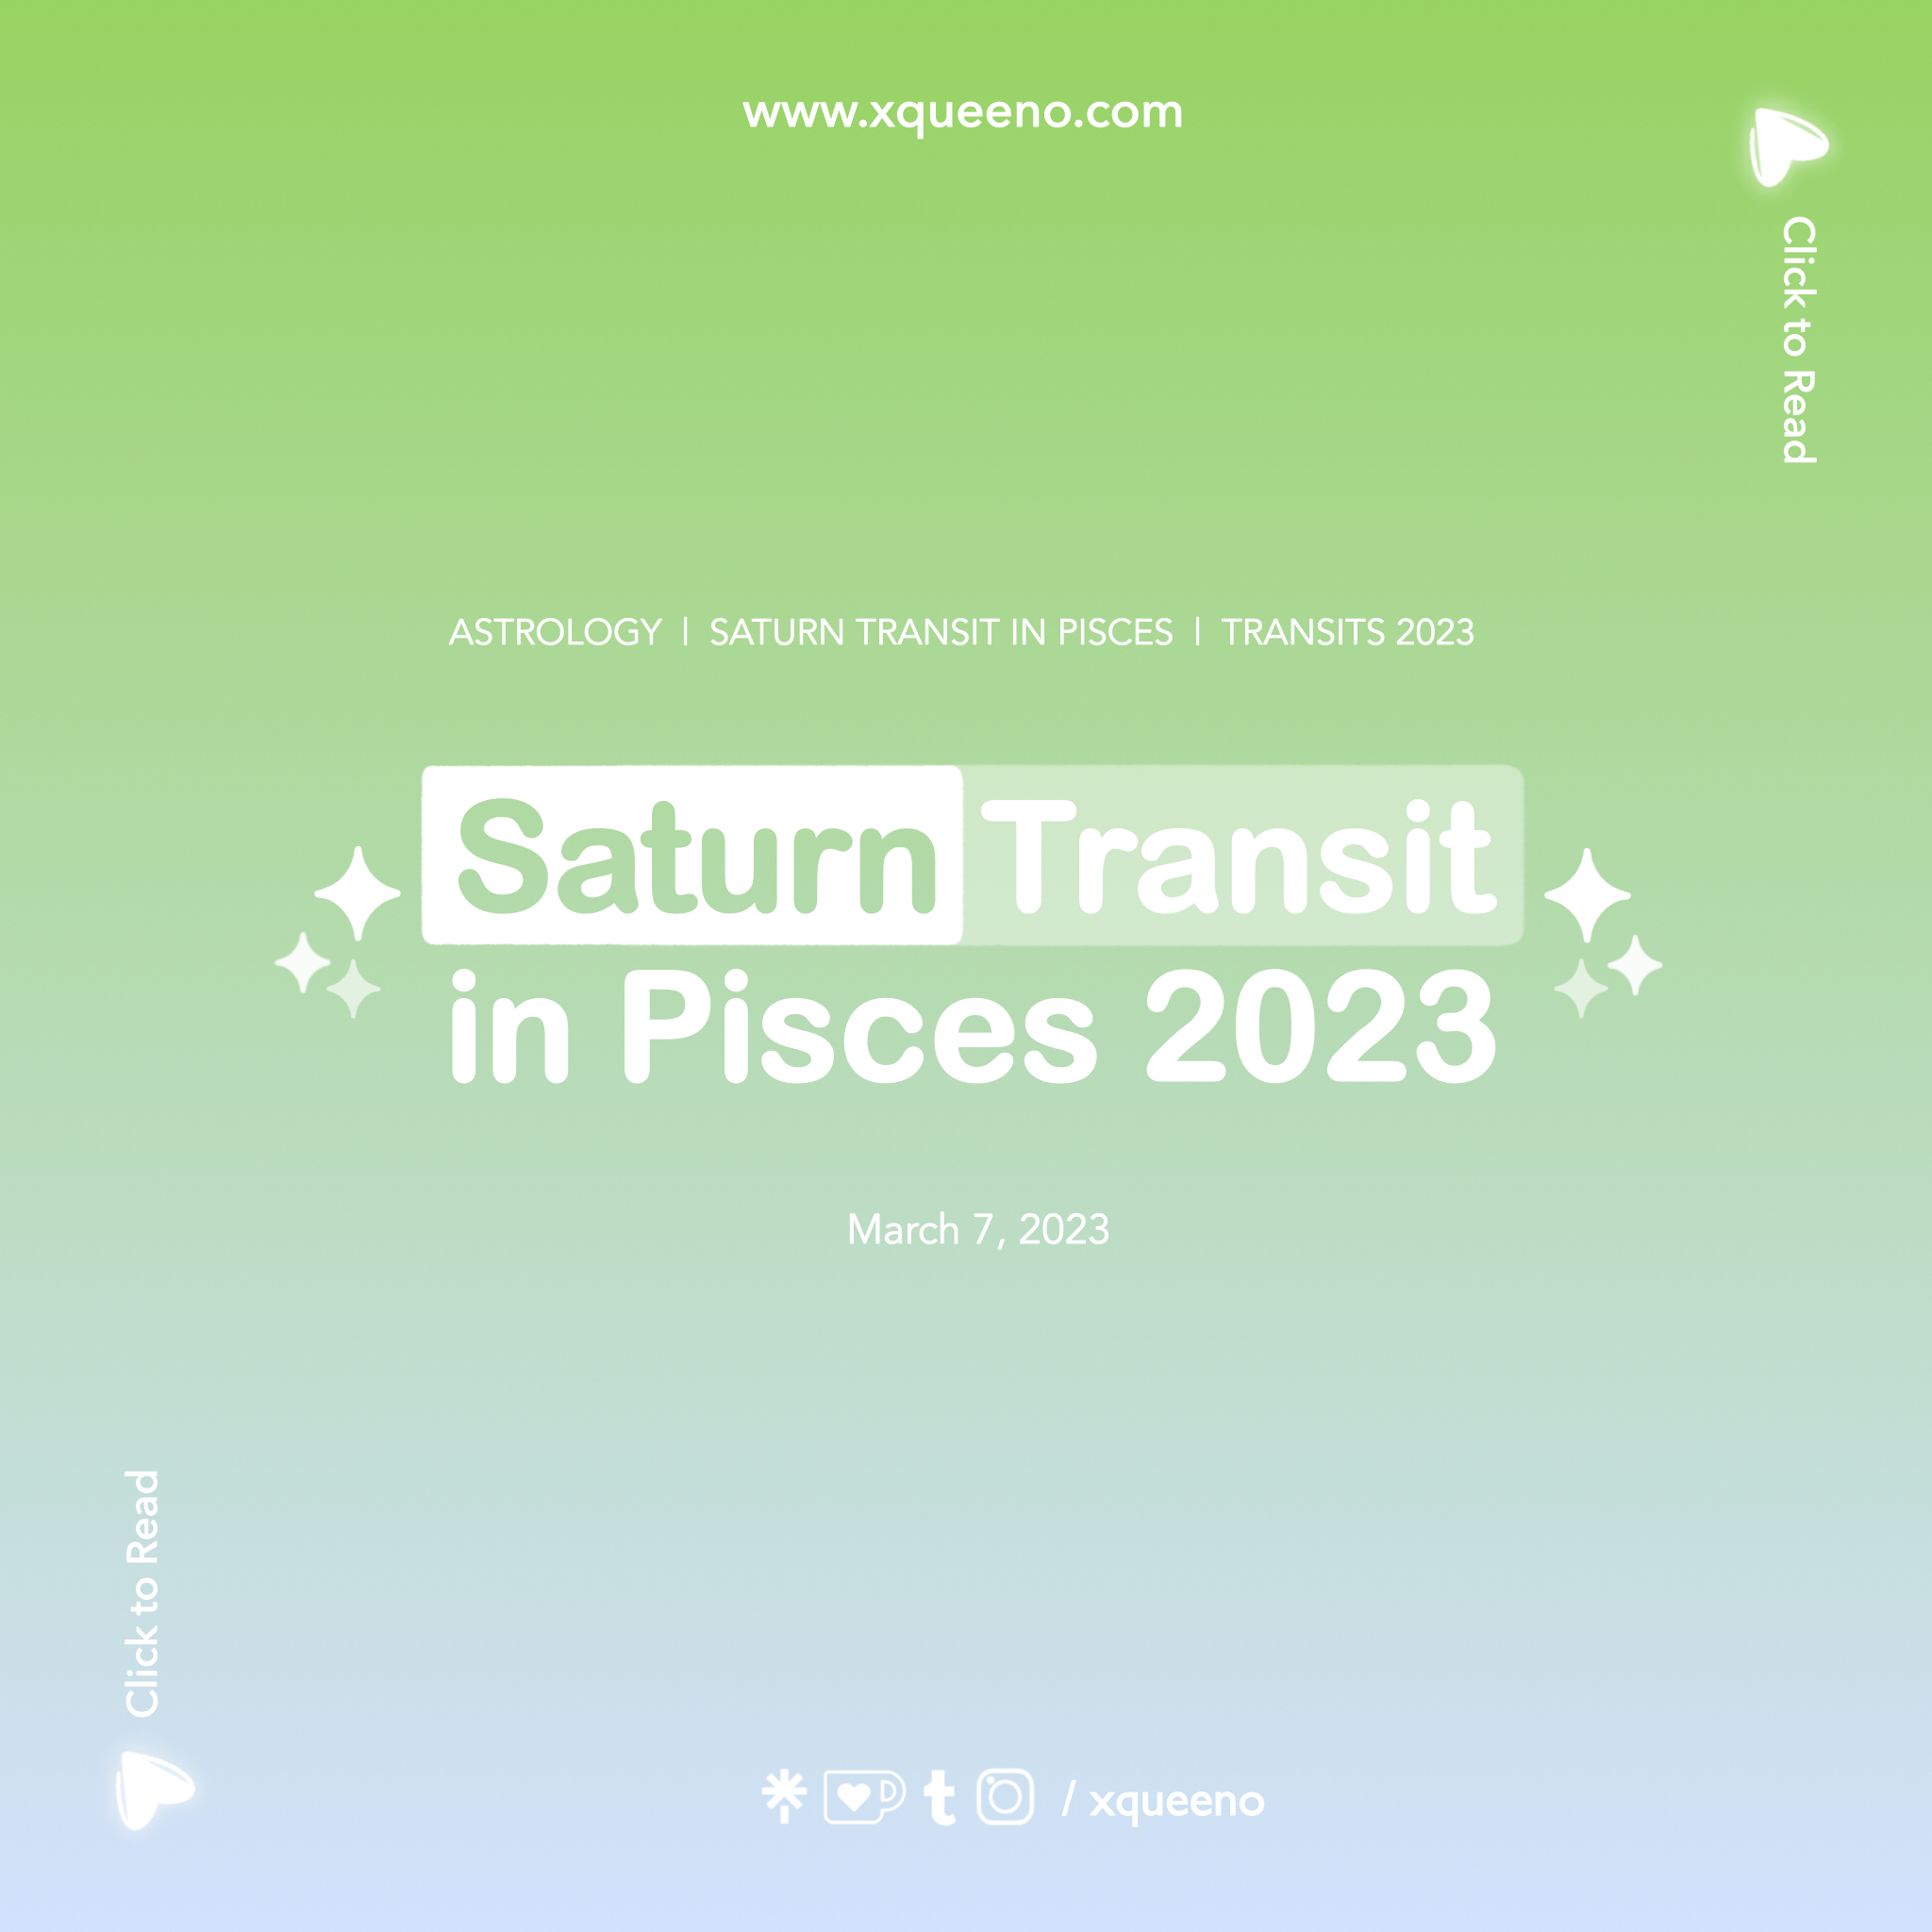 Saturn Transit in Pisces 2023 | March 7, 2023